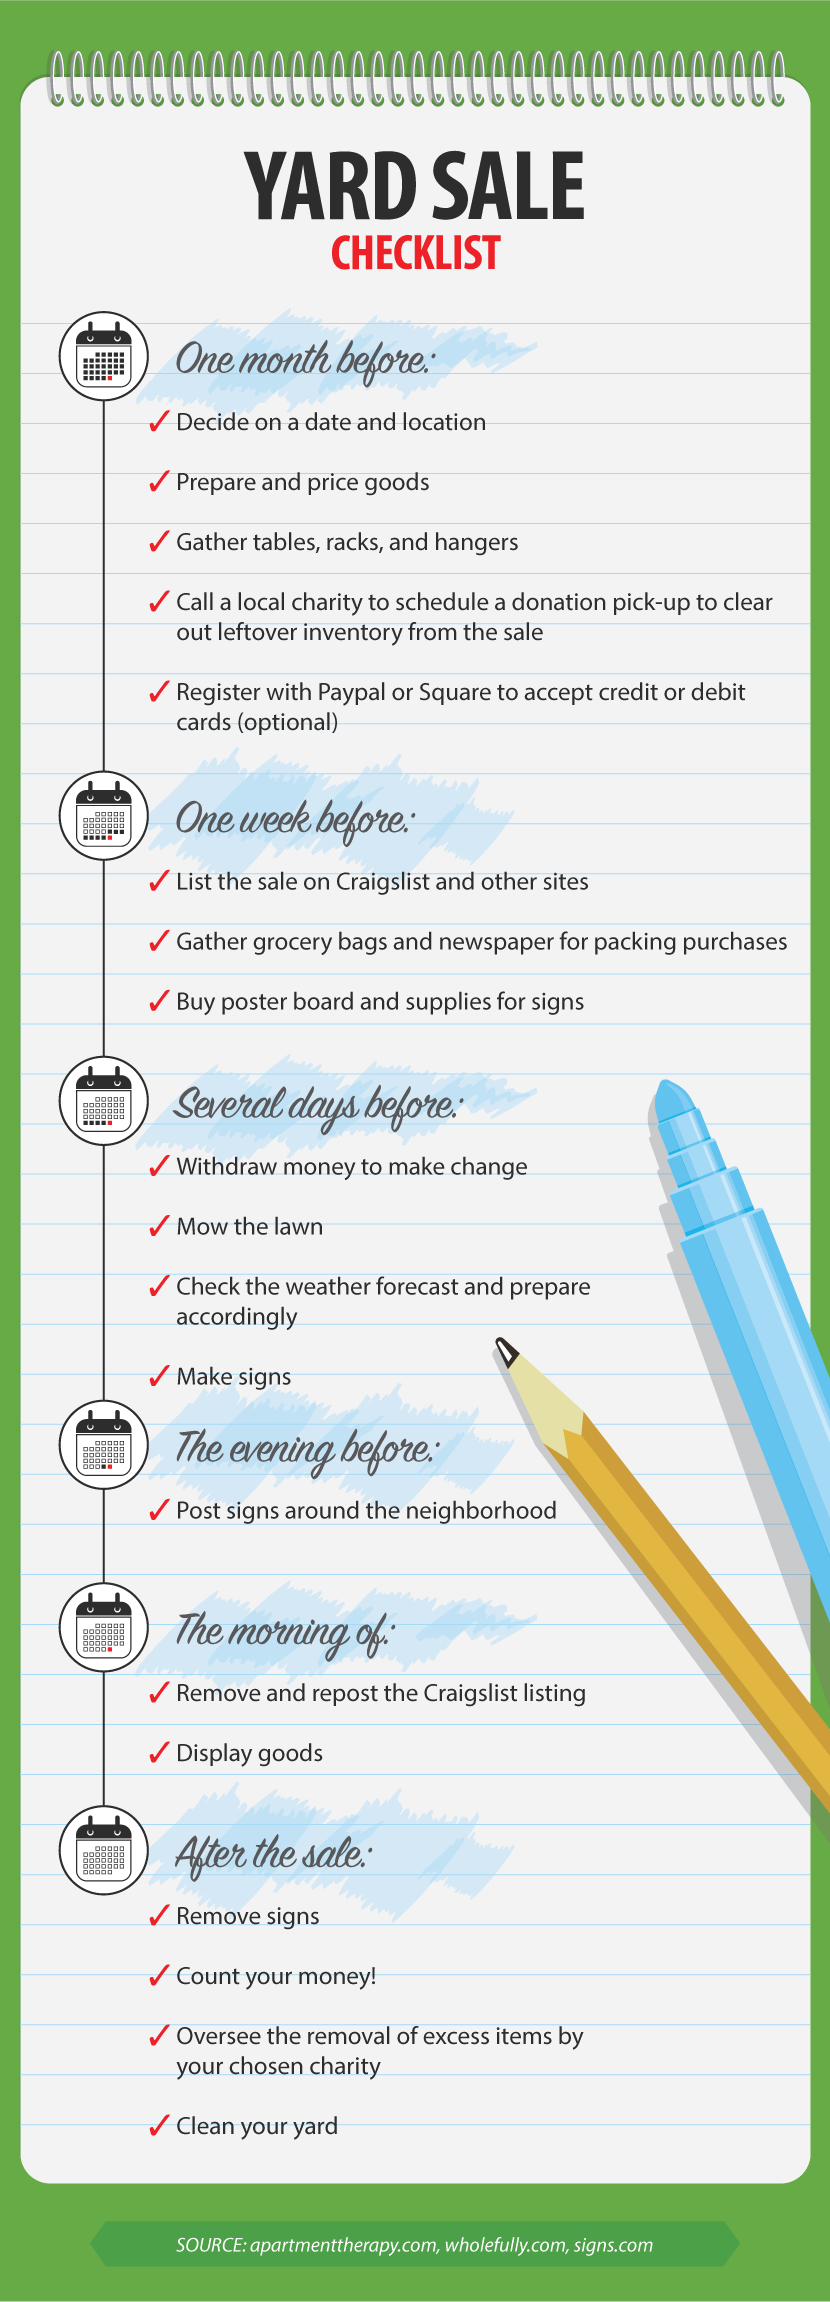 Yard Sale Checklist - How to Have a Successful Yard Sale